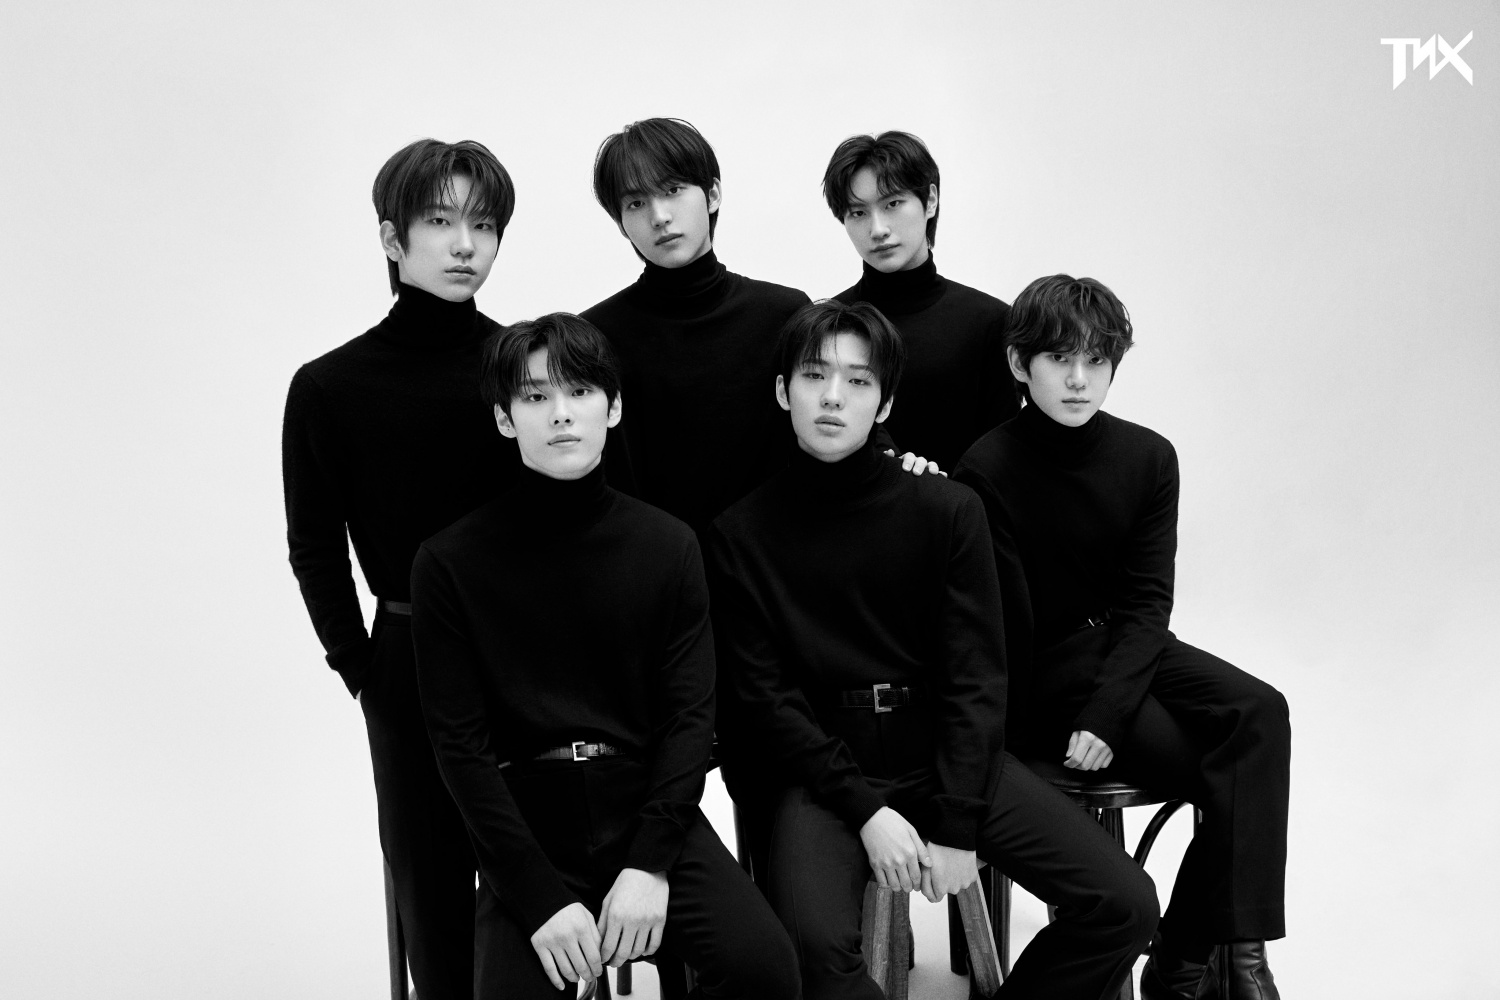 PNATION Boy group TNX, group profile… 6 person visual synergy